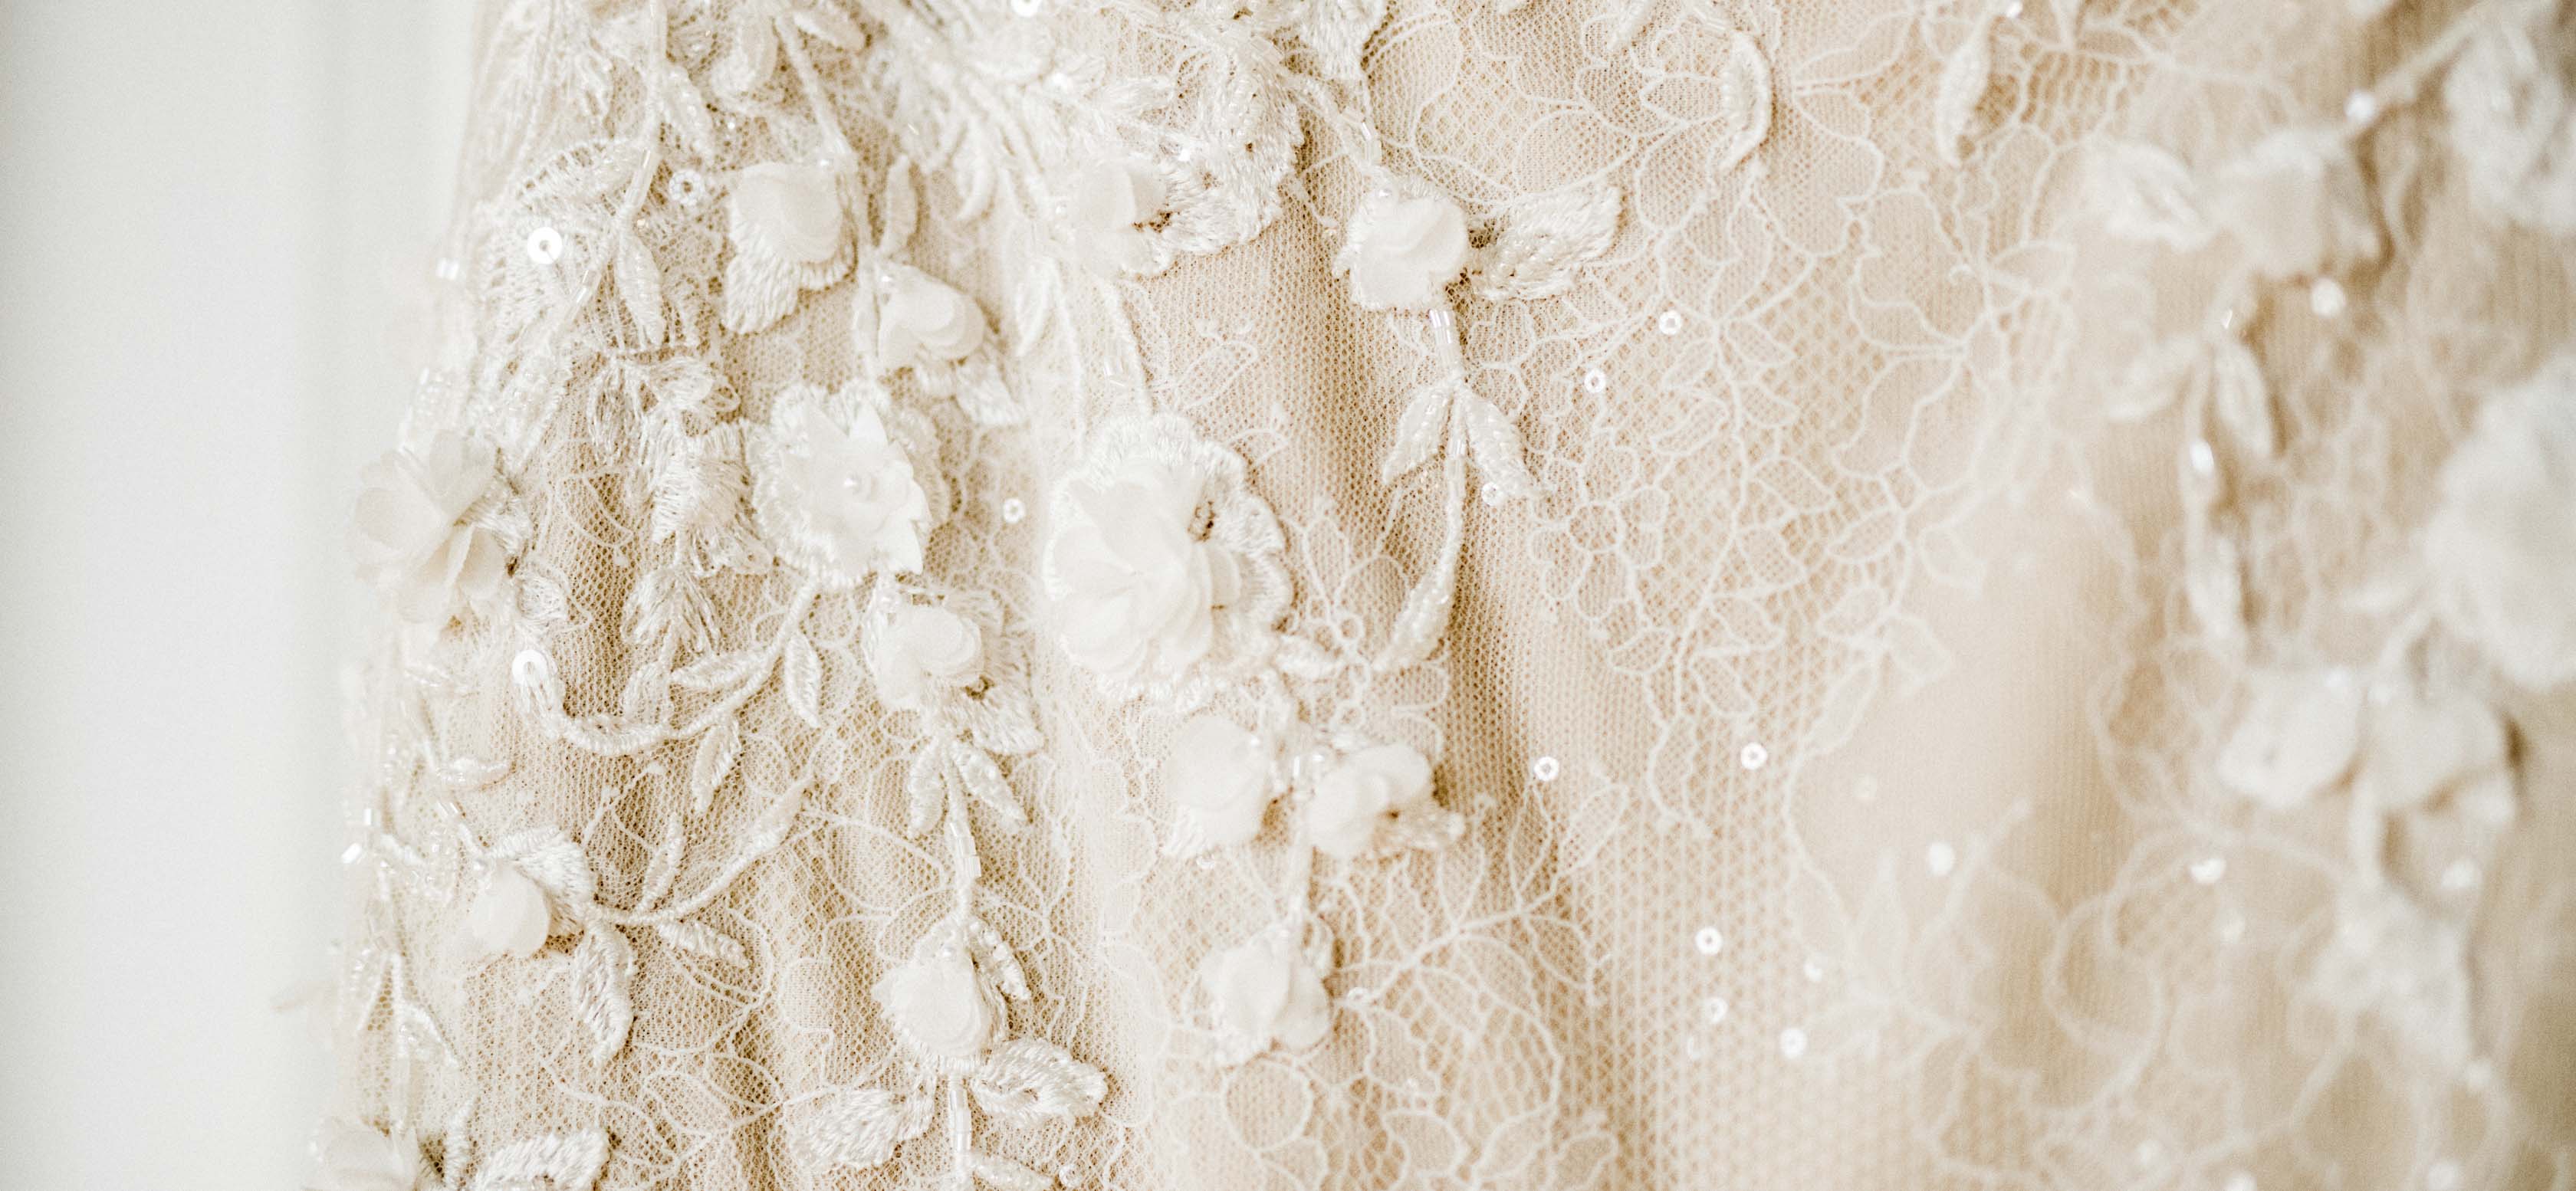 The fabric of a wedding dress.